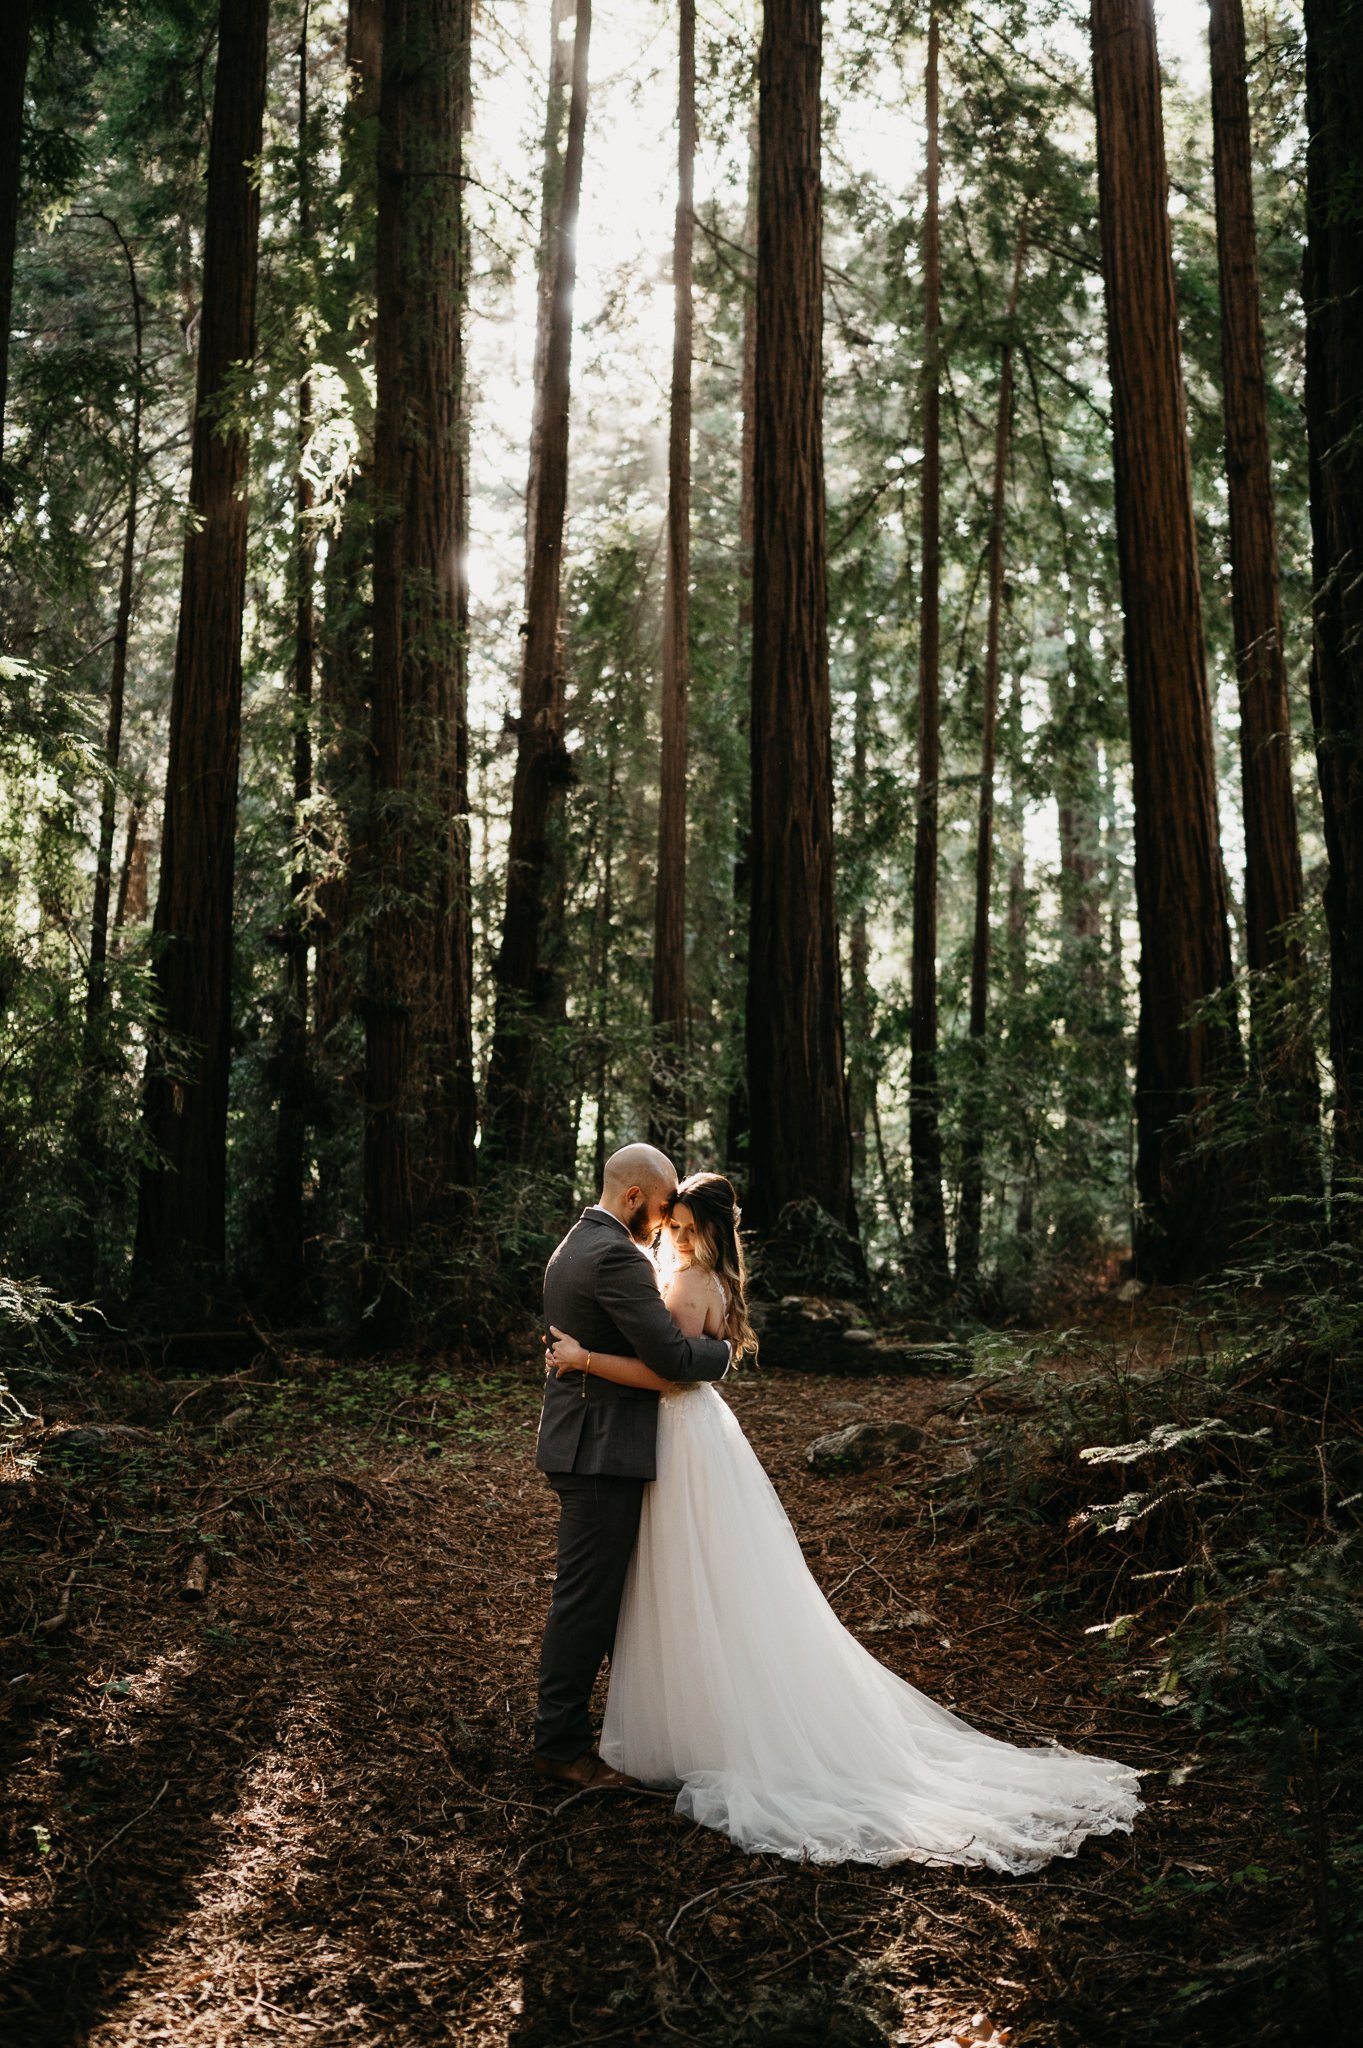  bride and groom embracing under tall redwood tress after elopement ceremony in Big Sur California